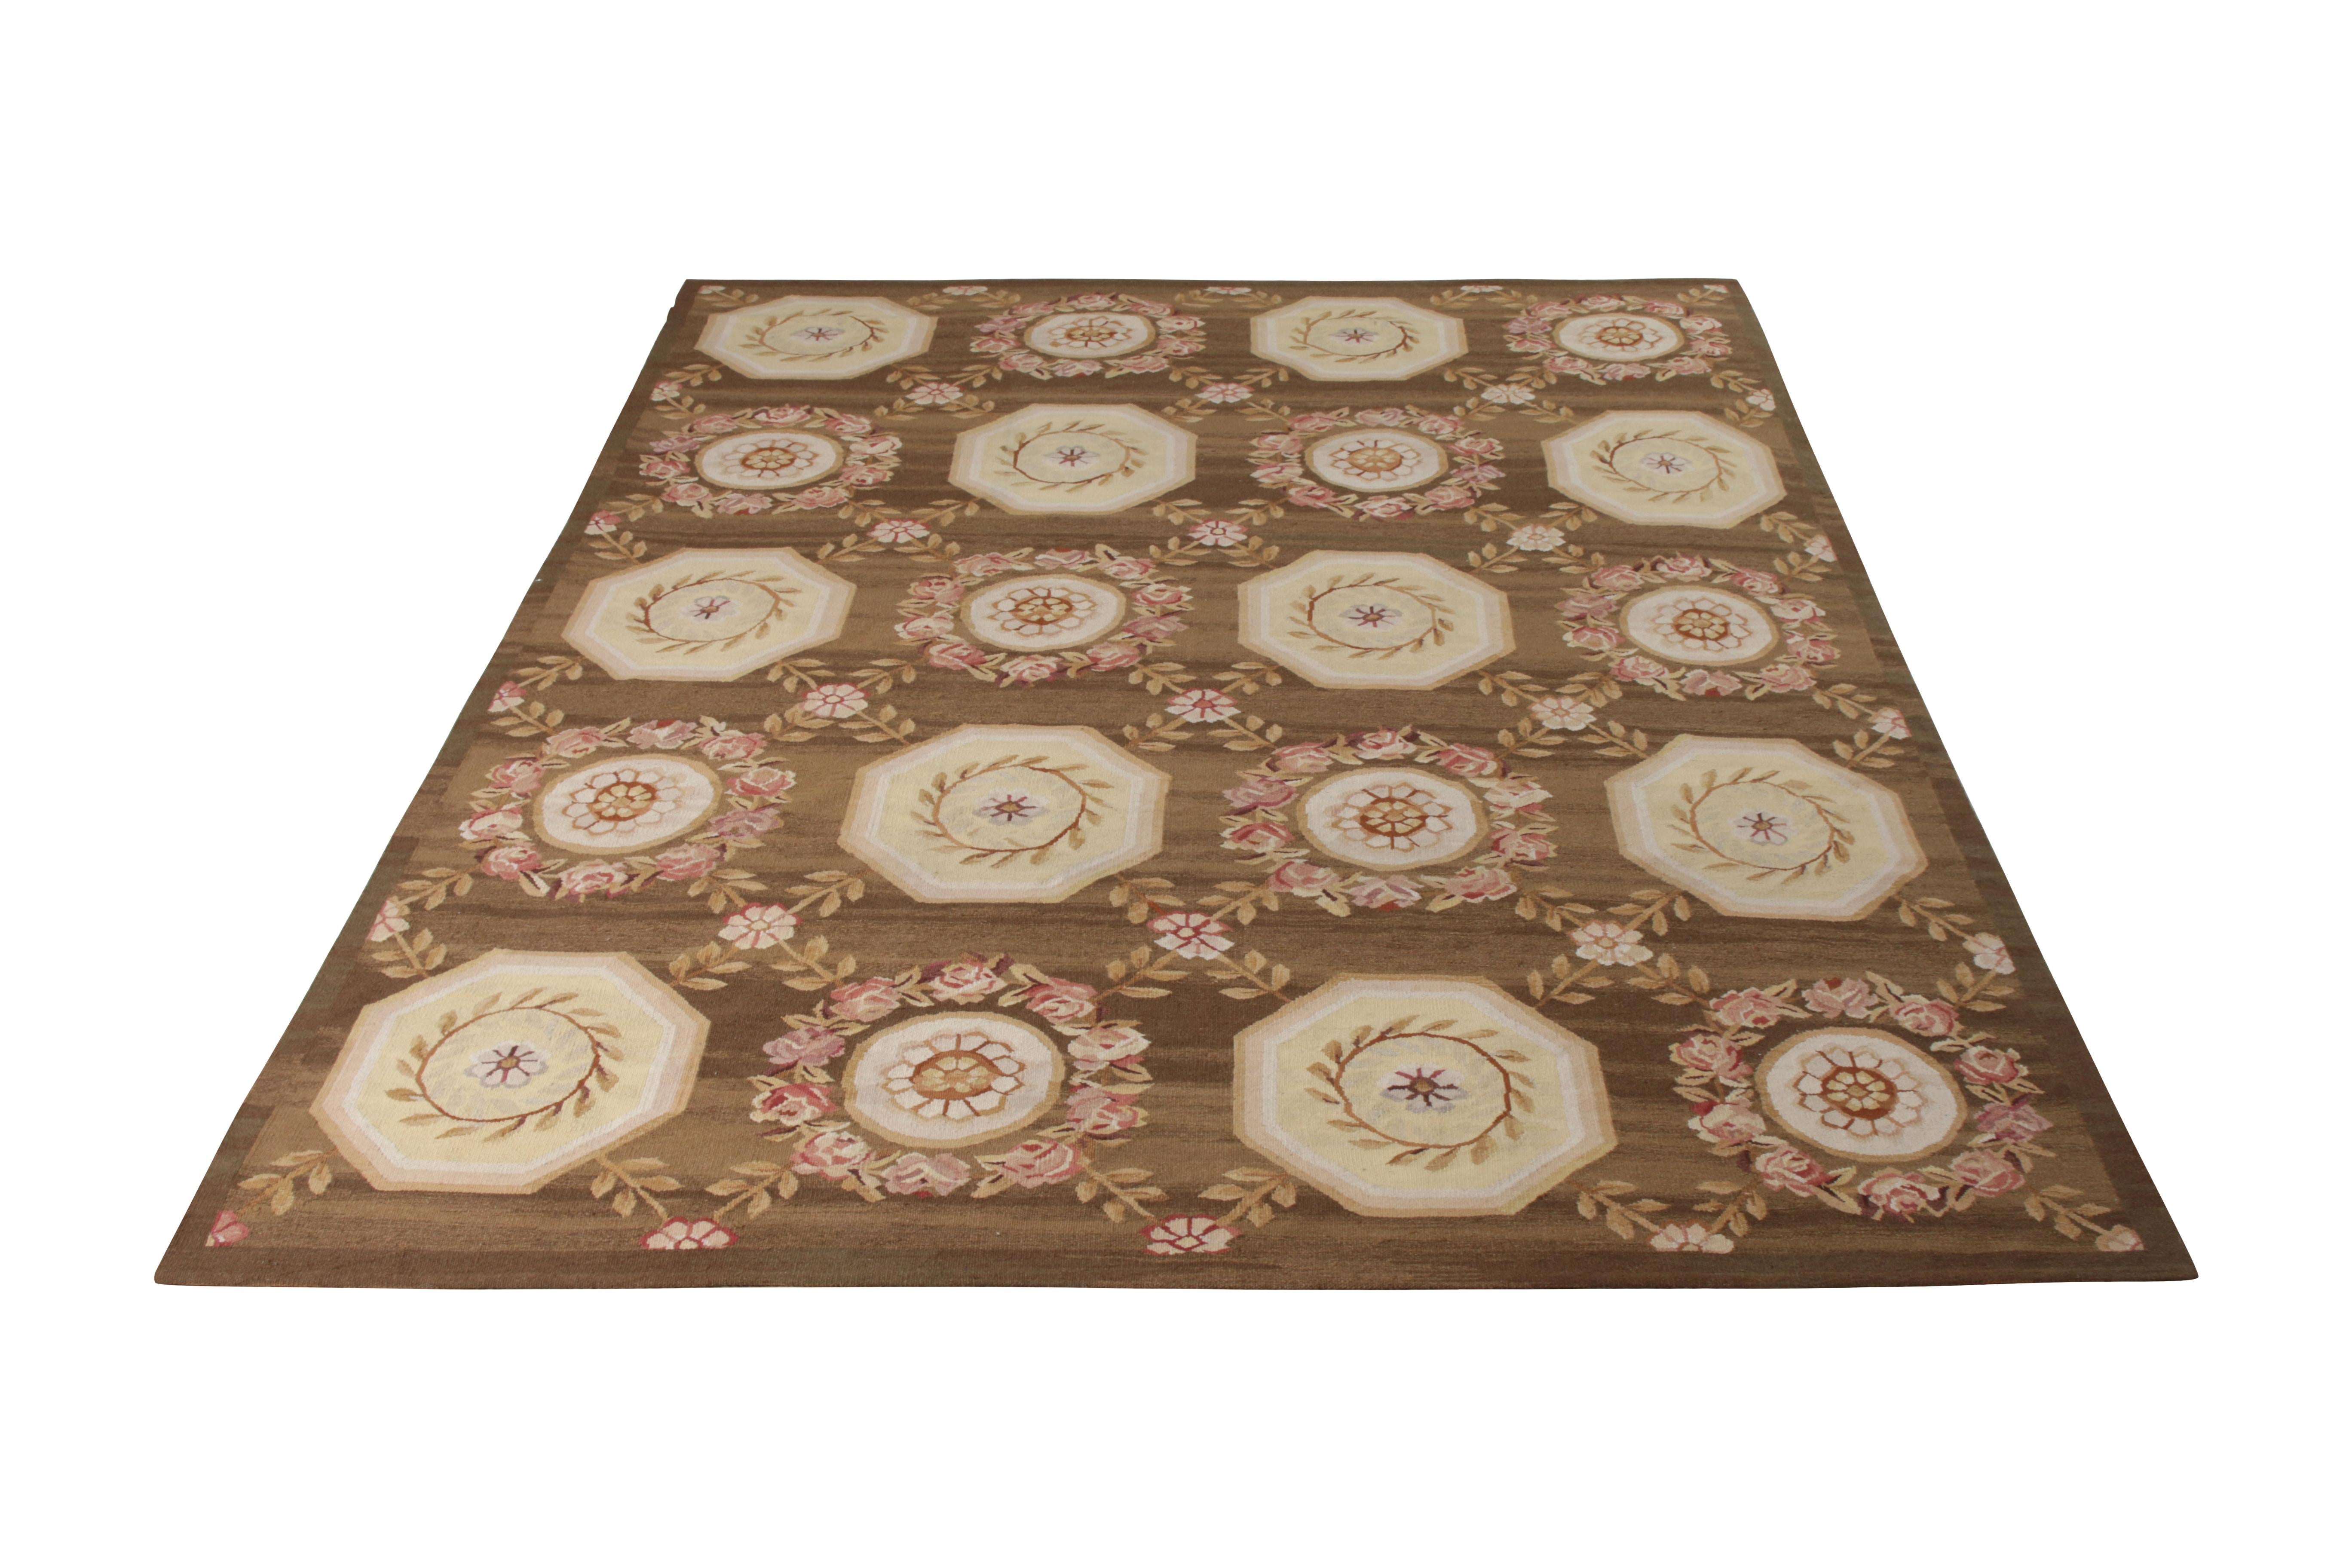 Nepalese Rug & Kilim’s Handmade Aubusson Style Flat-Weave Rug in Brown and Pink